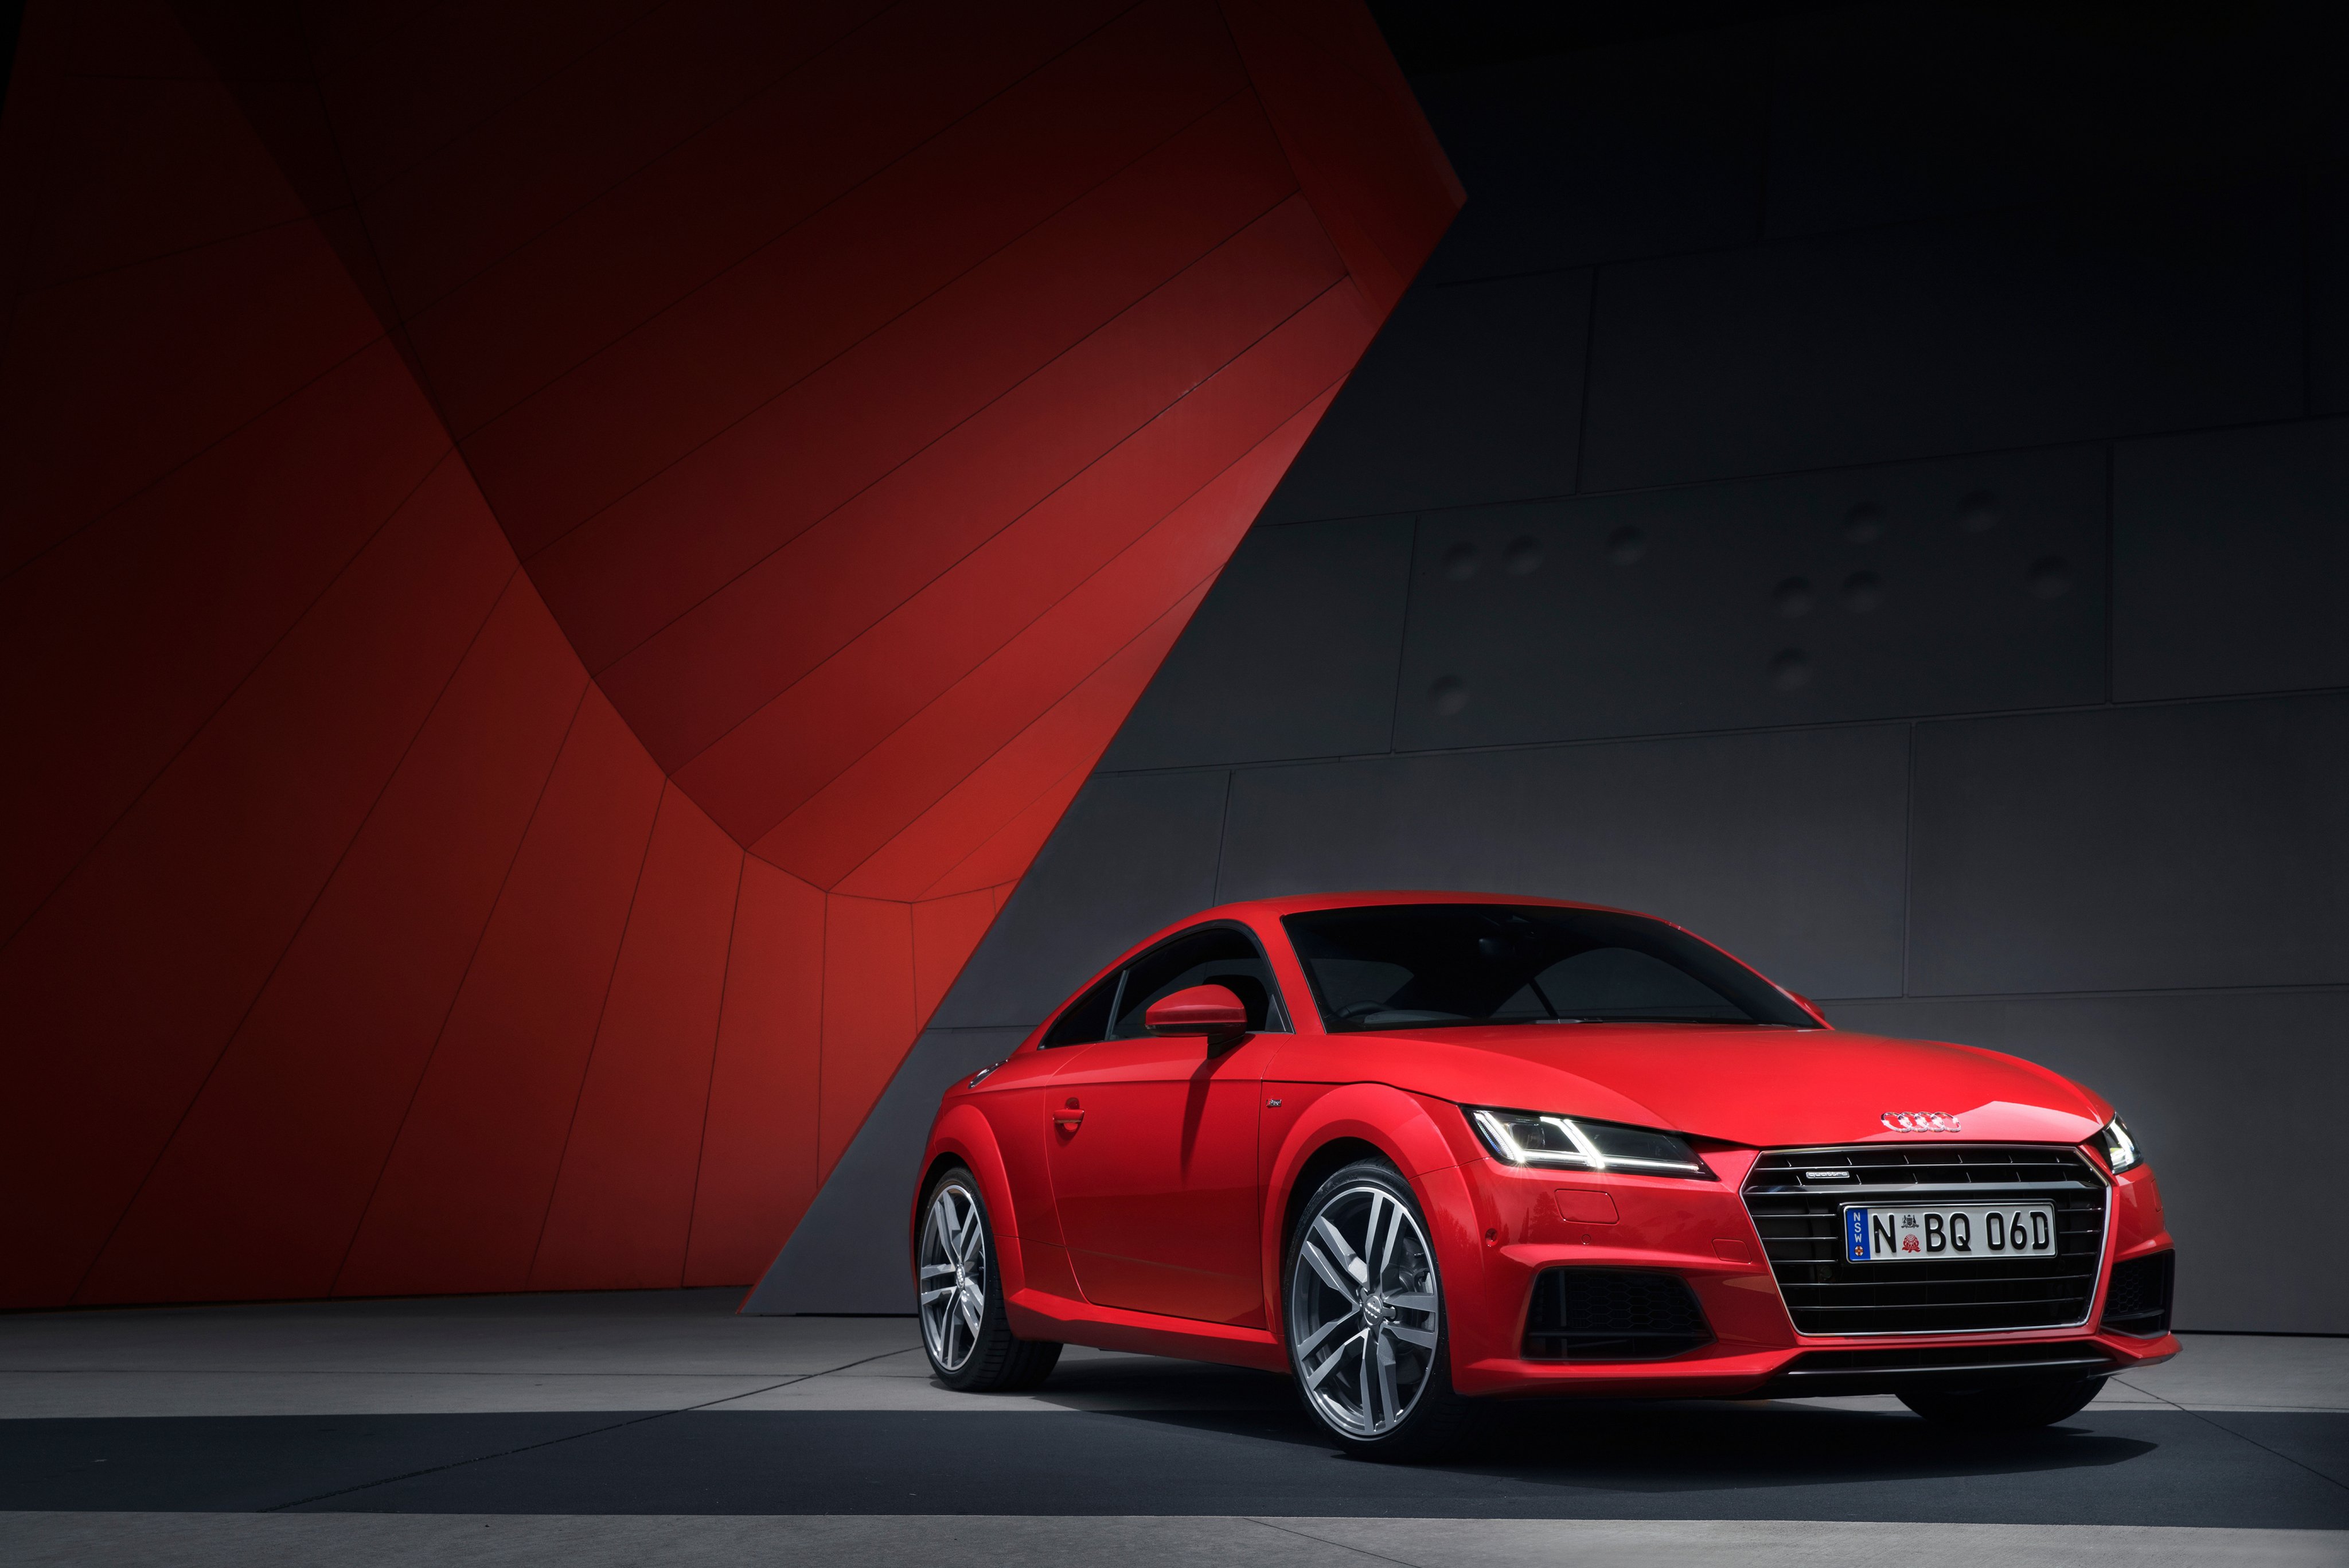 Audi Wallpapers Images Free - Audi Tt Coupe Red - HD Wallpaper 